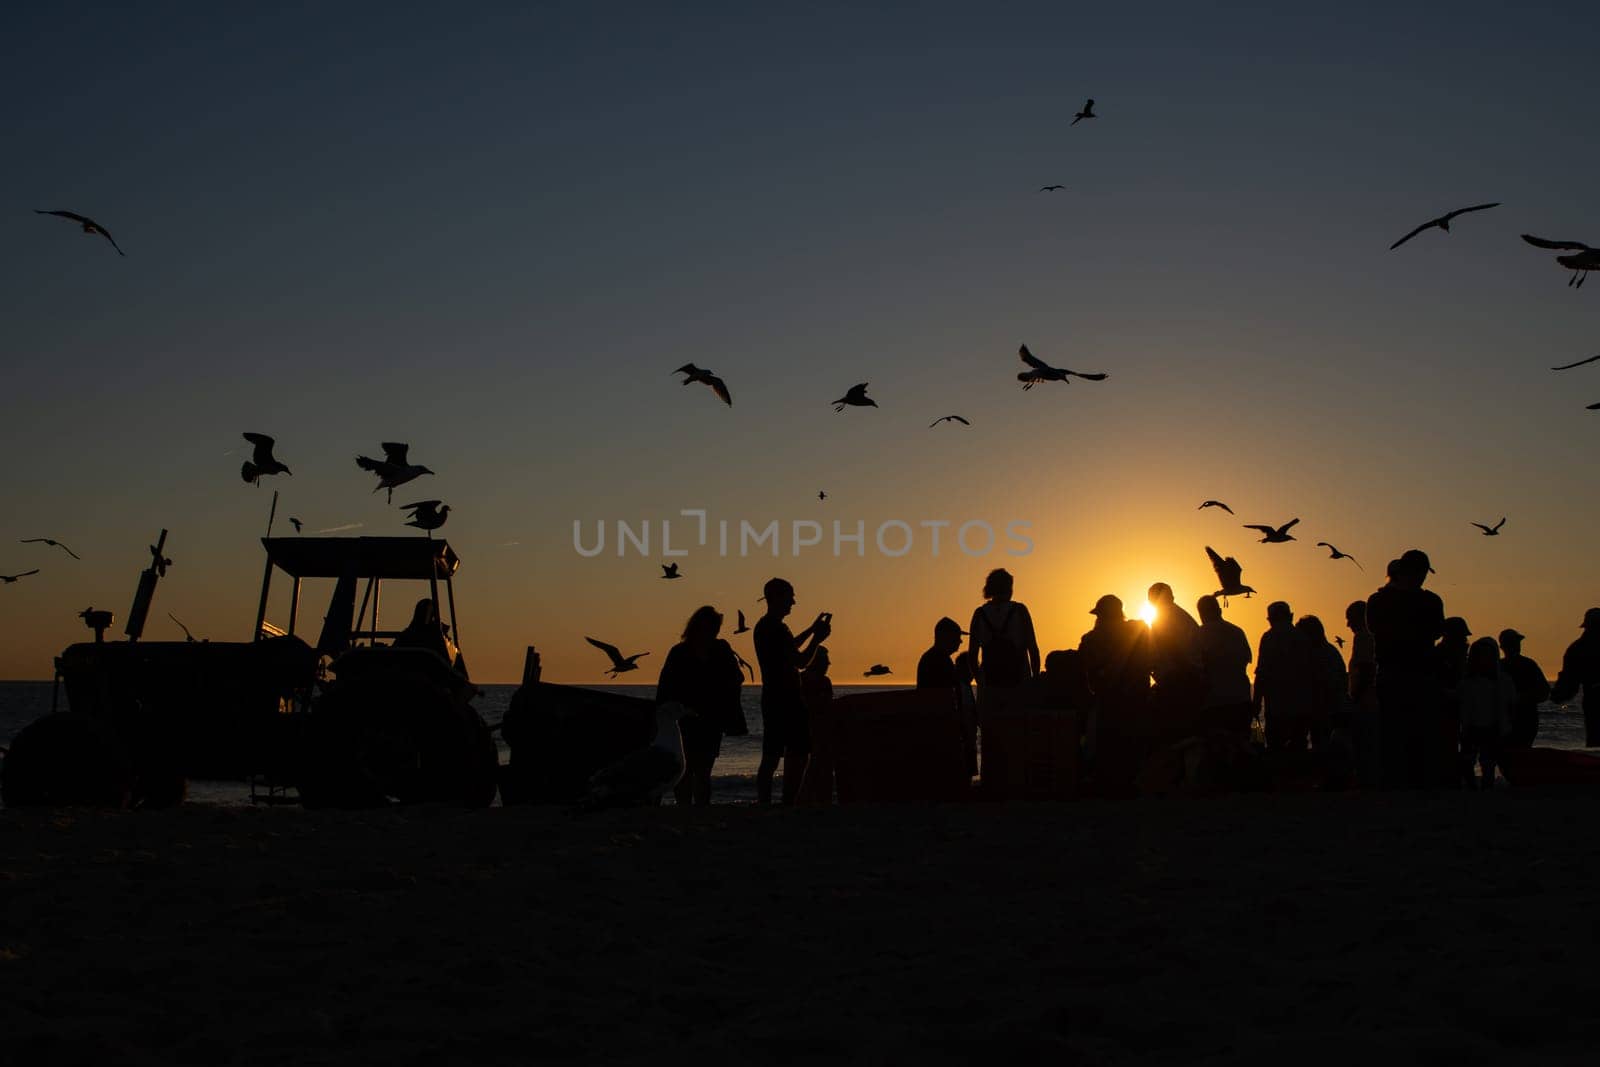 Seagulls fly over the sea at sunset - people are standing on the shore by the tractor. Mid shot